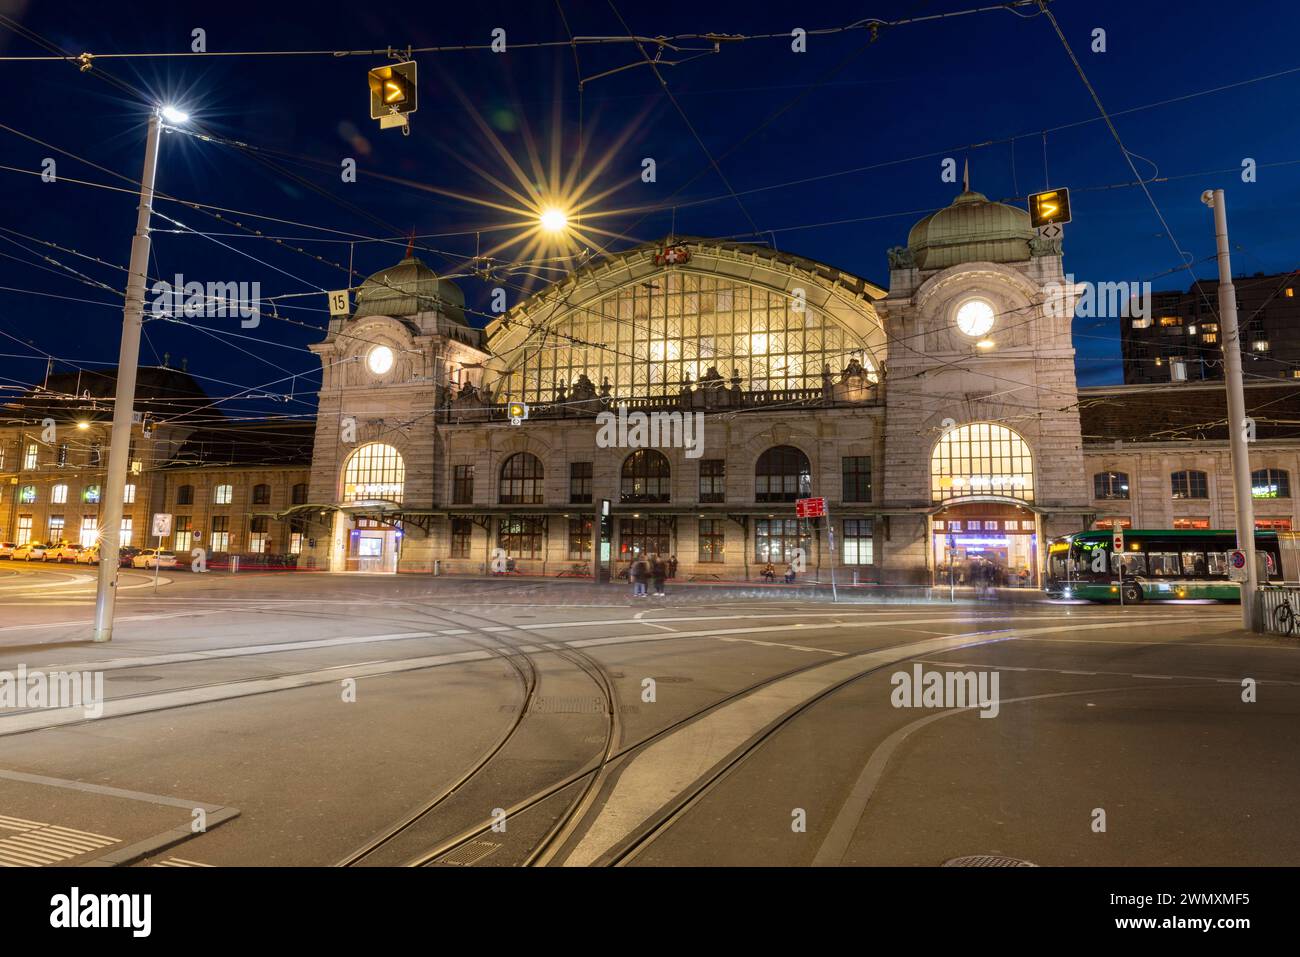 Evening atmosphere at SBB railway station, Basel, Canton of Basel-Stadt, Switzerland Stock Photo